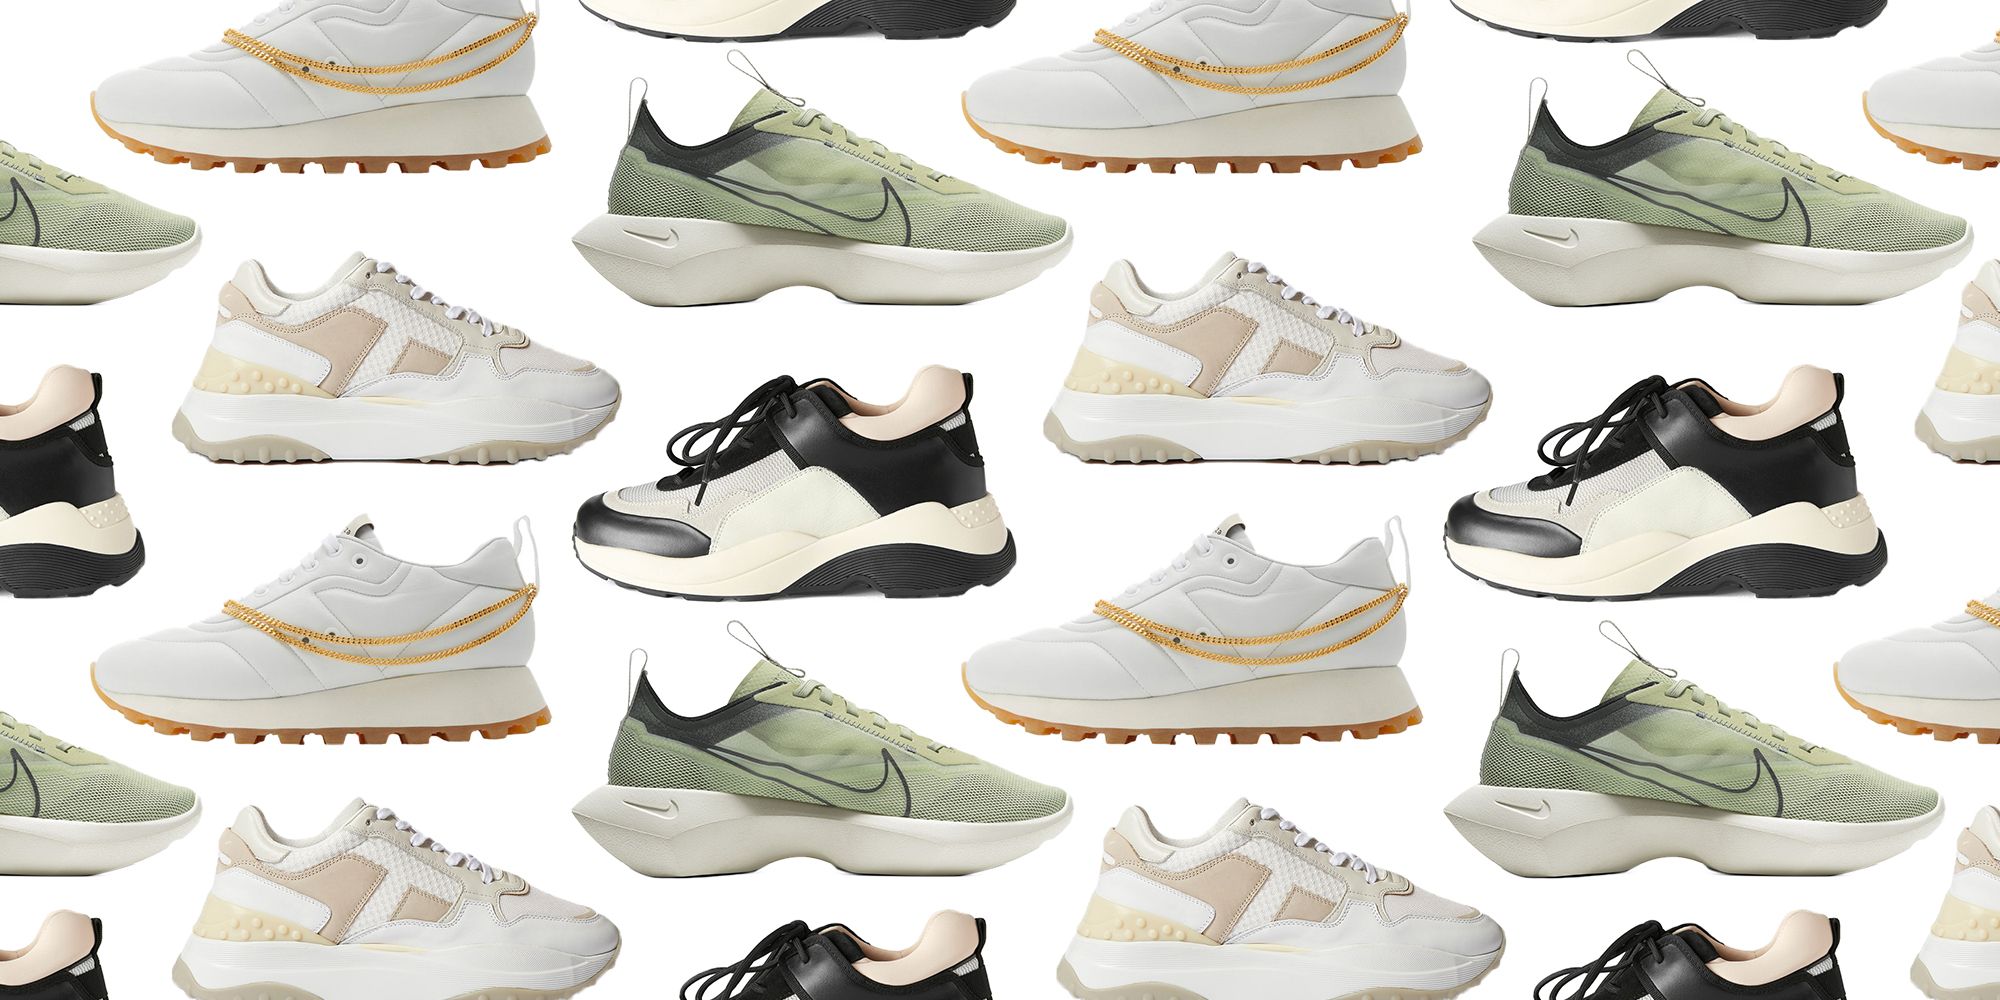 trendy sneakers right now